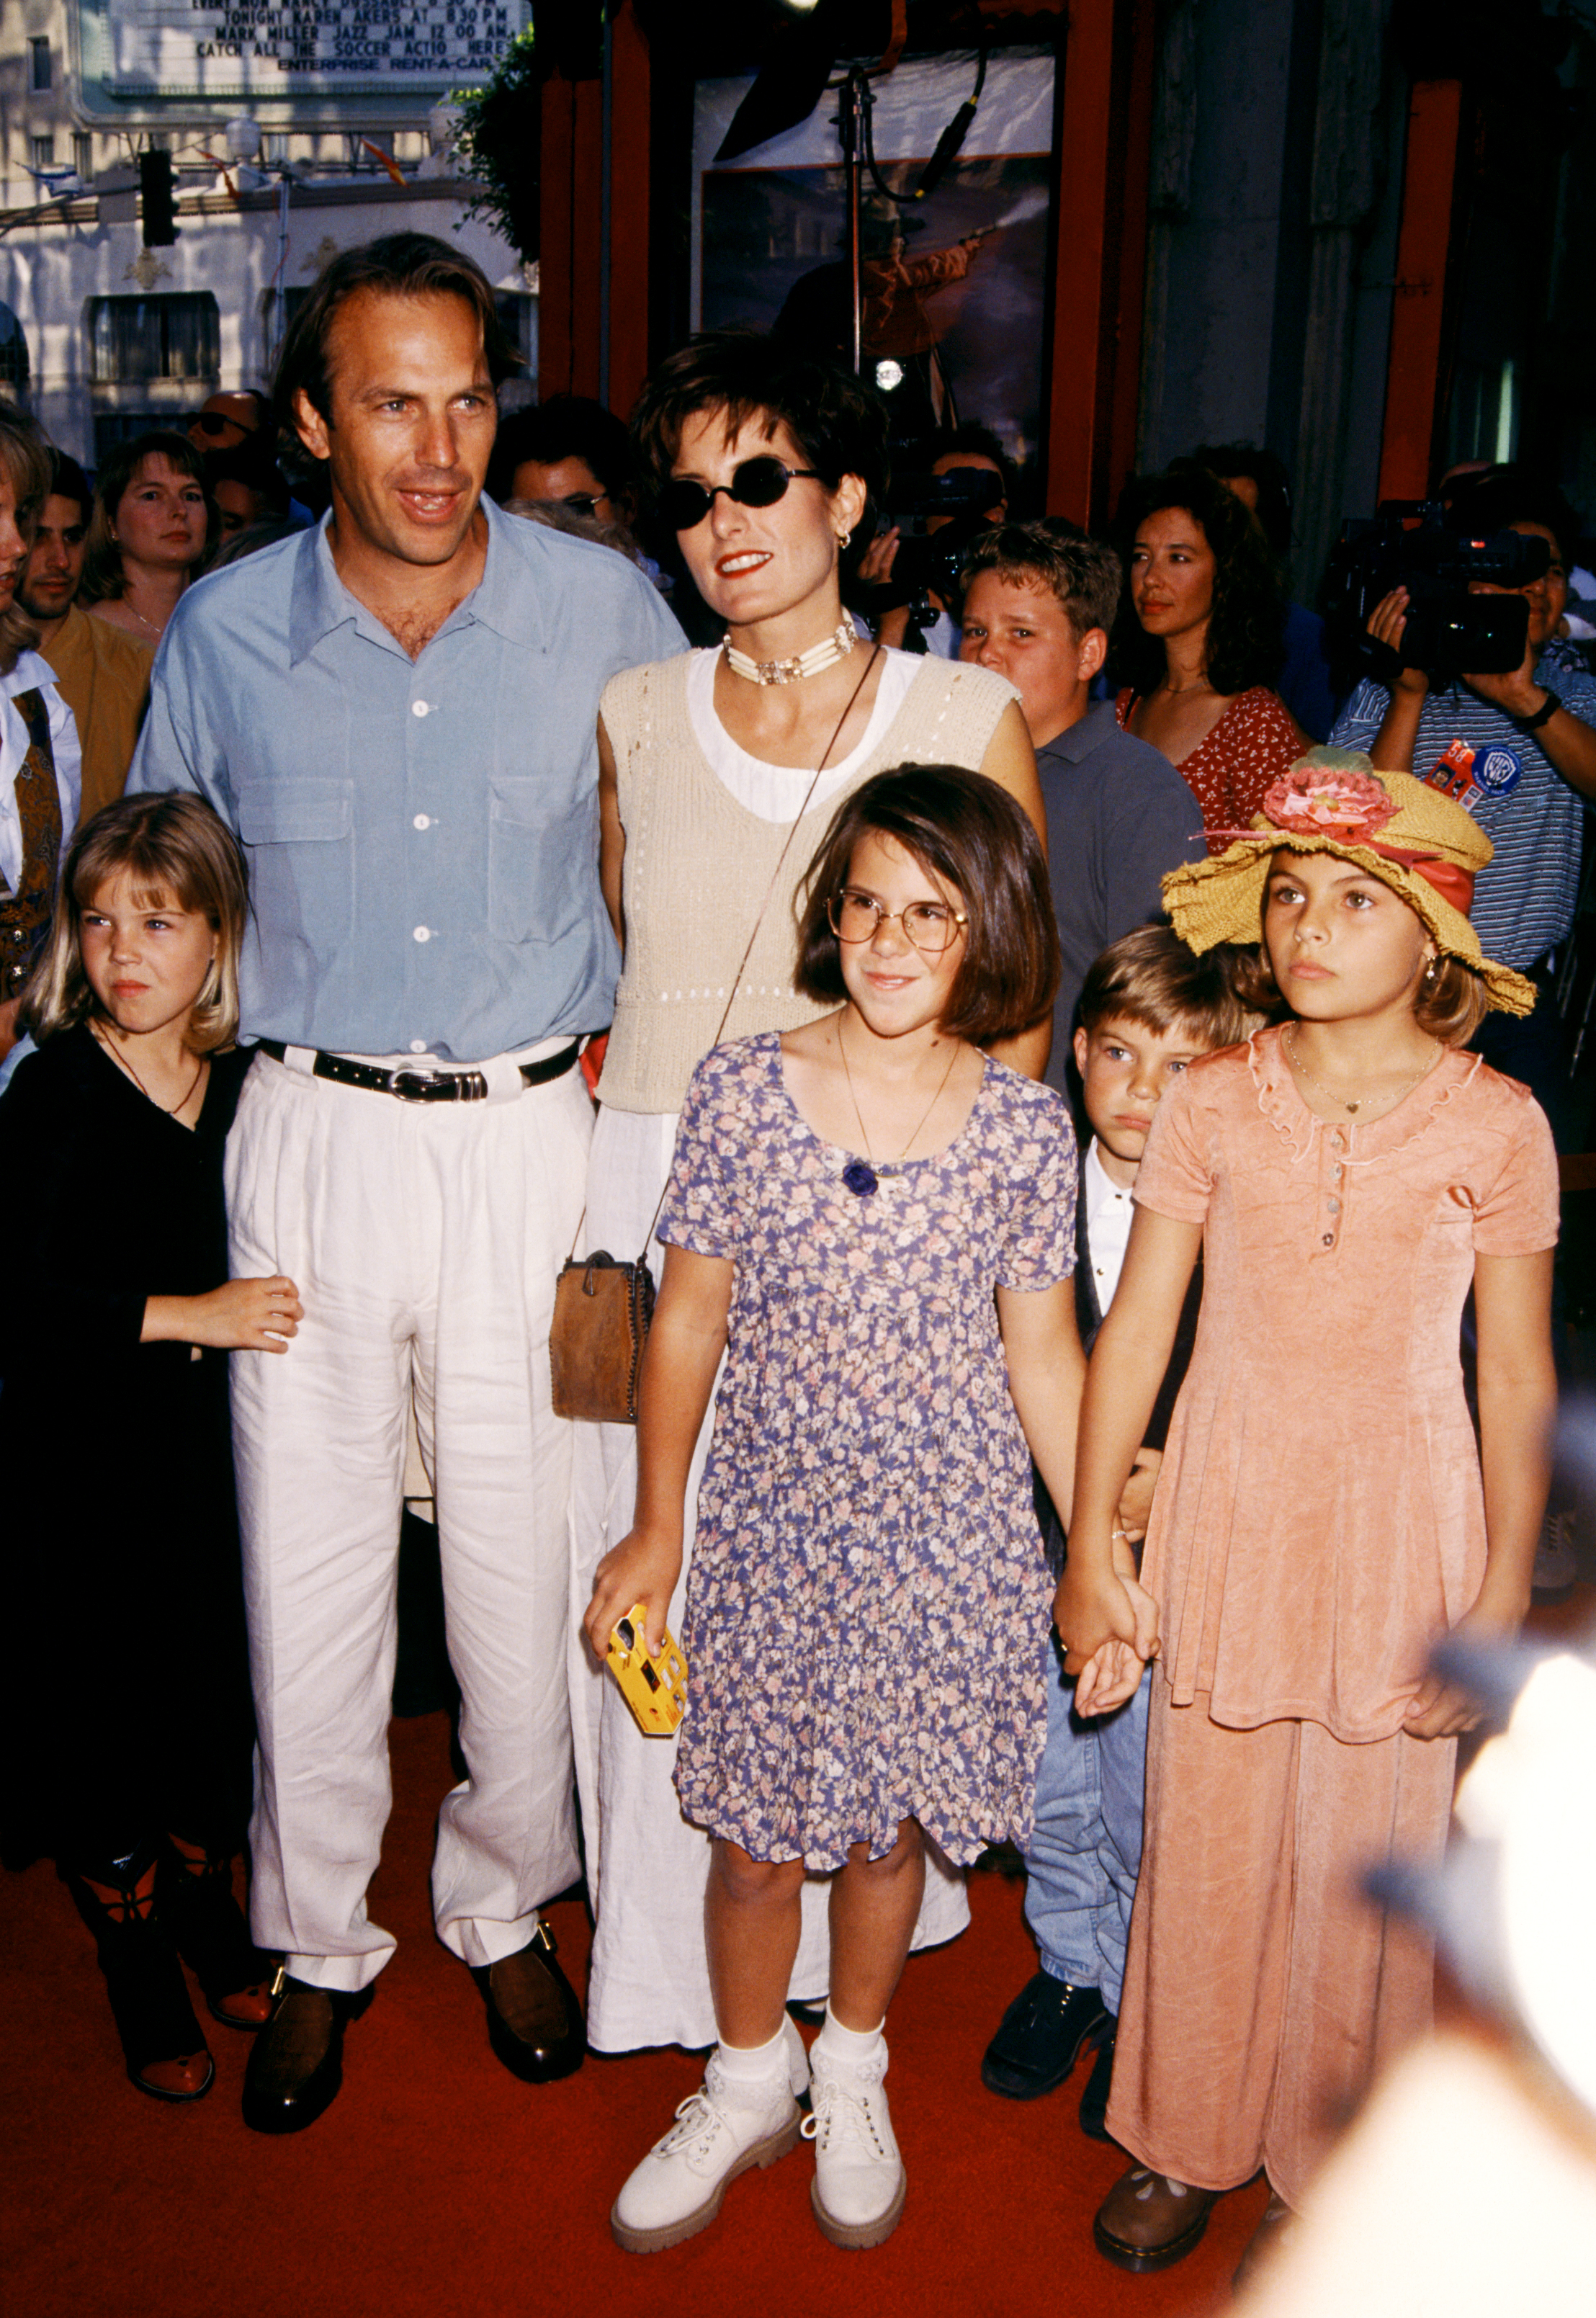 Kevin Costner with his ex-wife and children Cindy Costner, Annie, Lily and Joe on June 18, 1994 at the Mann's Chinese Theater in Hollywood, California. | Source: Getty Images